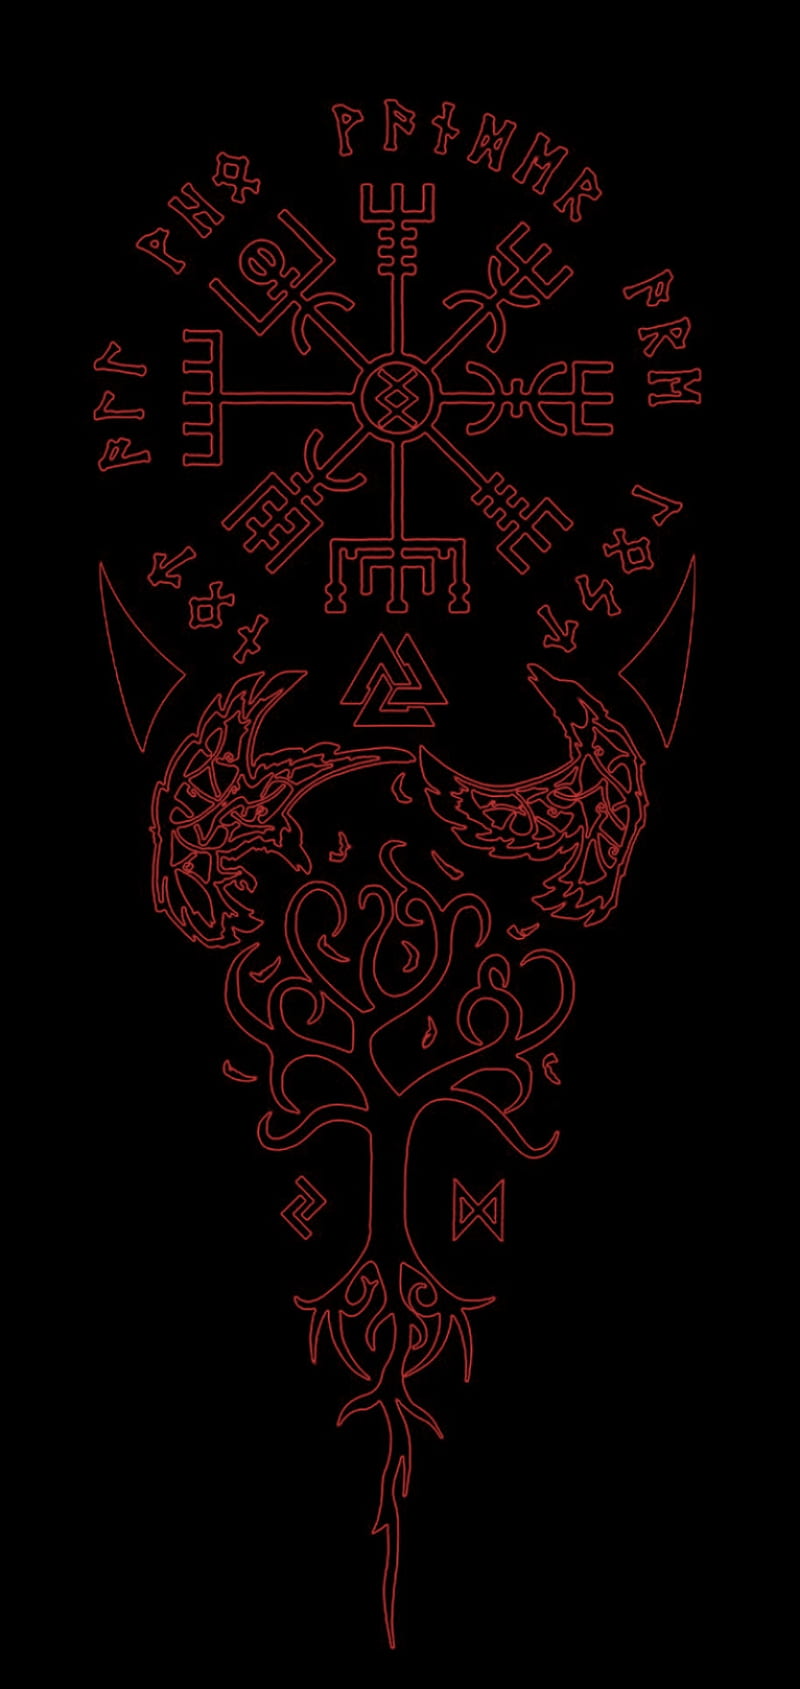 Does anyone have any good norse phone wallpaper Preferably on the lighter  side Linked is what Ive made with pictures I dont own   rnorsemythology